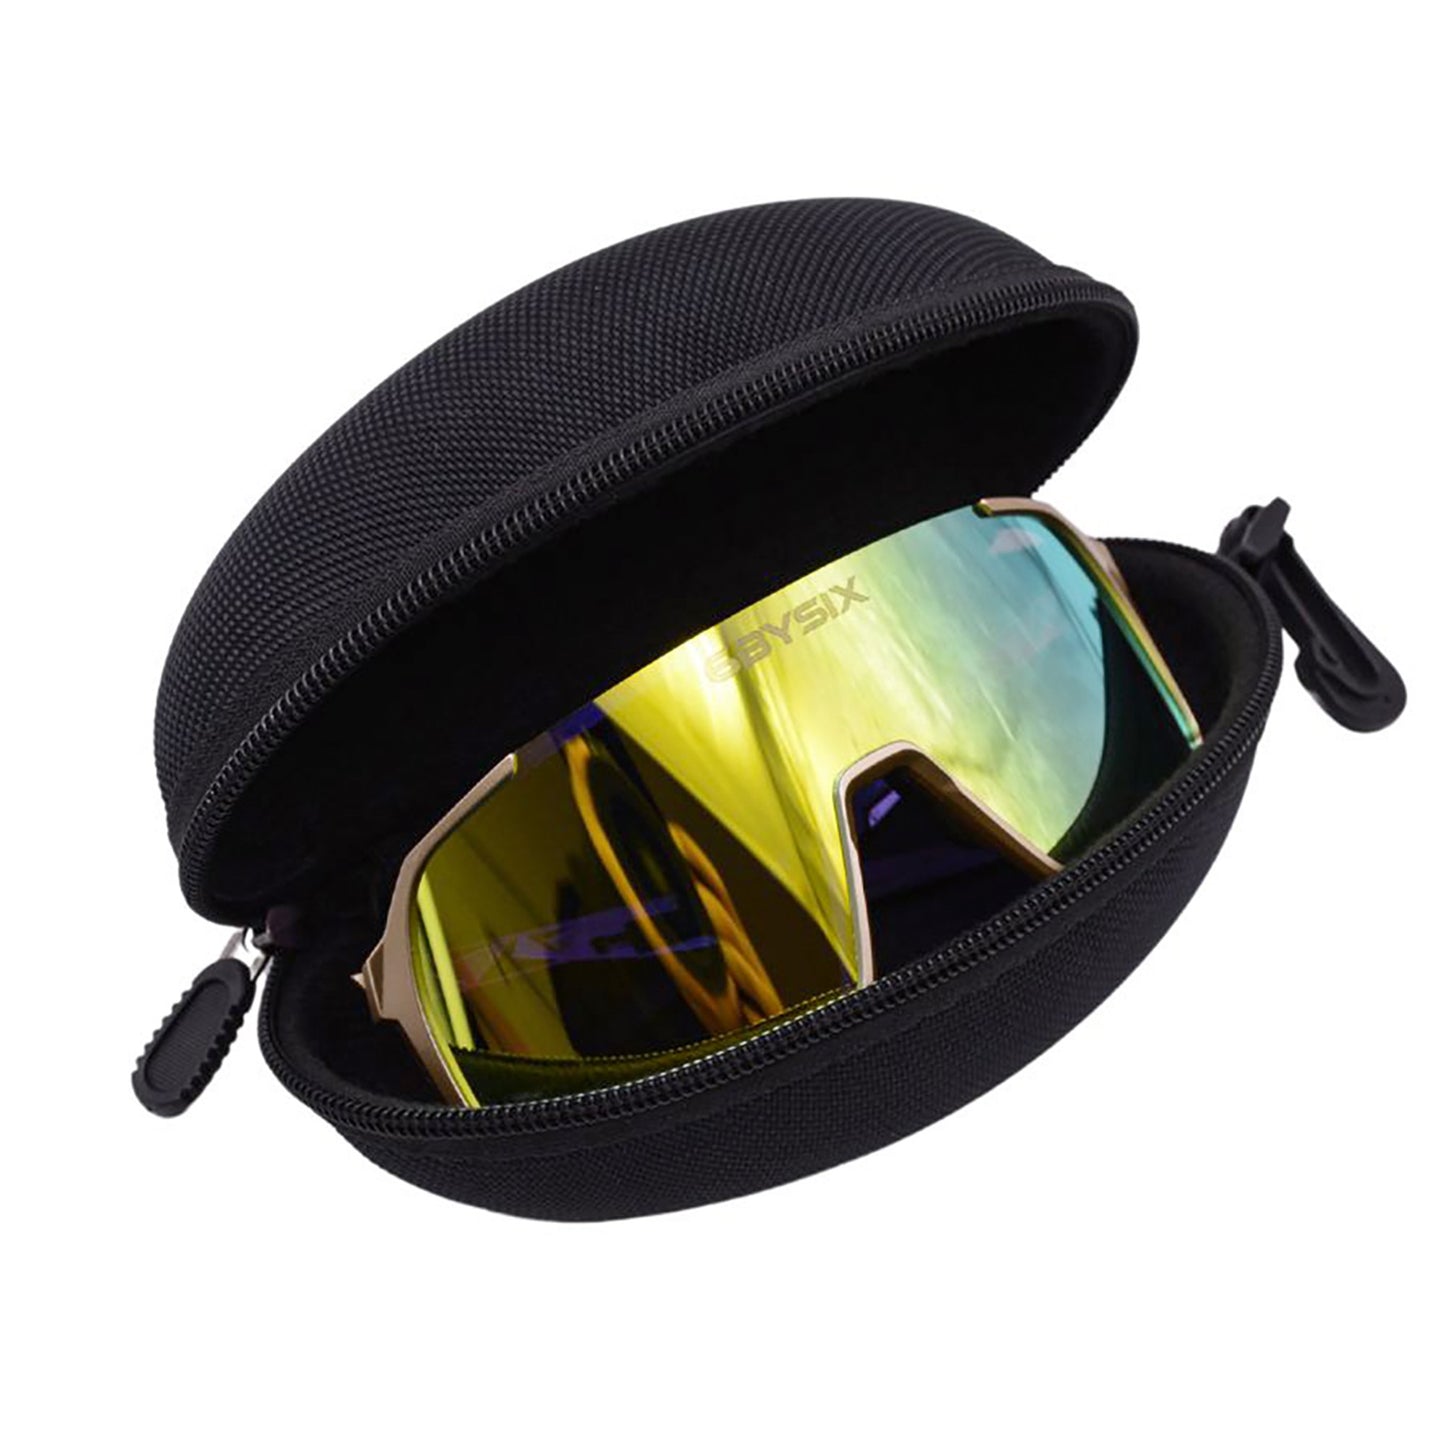 6bySix Comet Racing Shades - Gold Prism